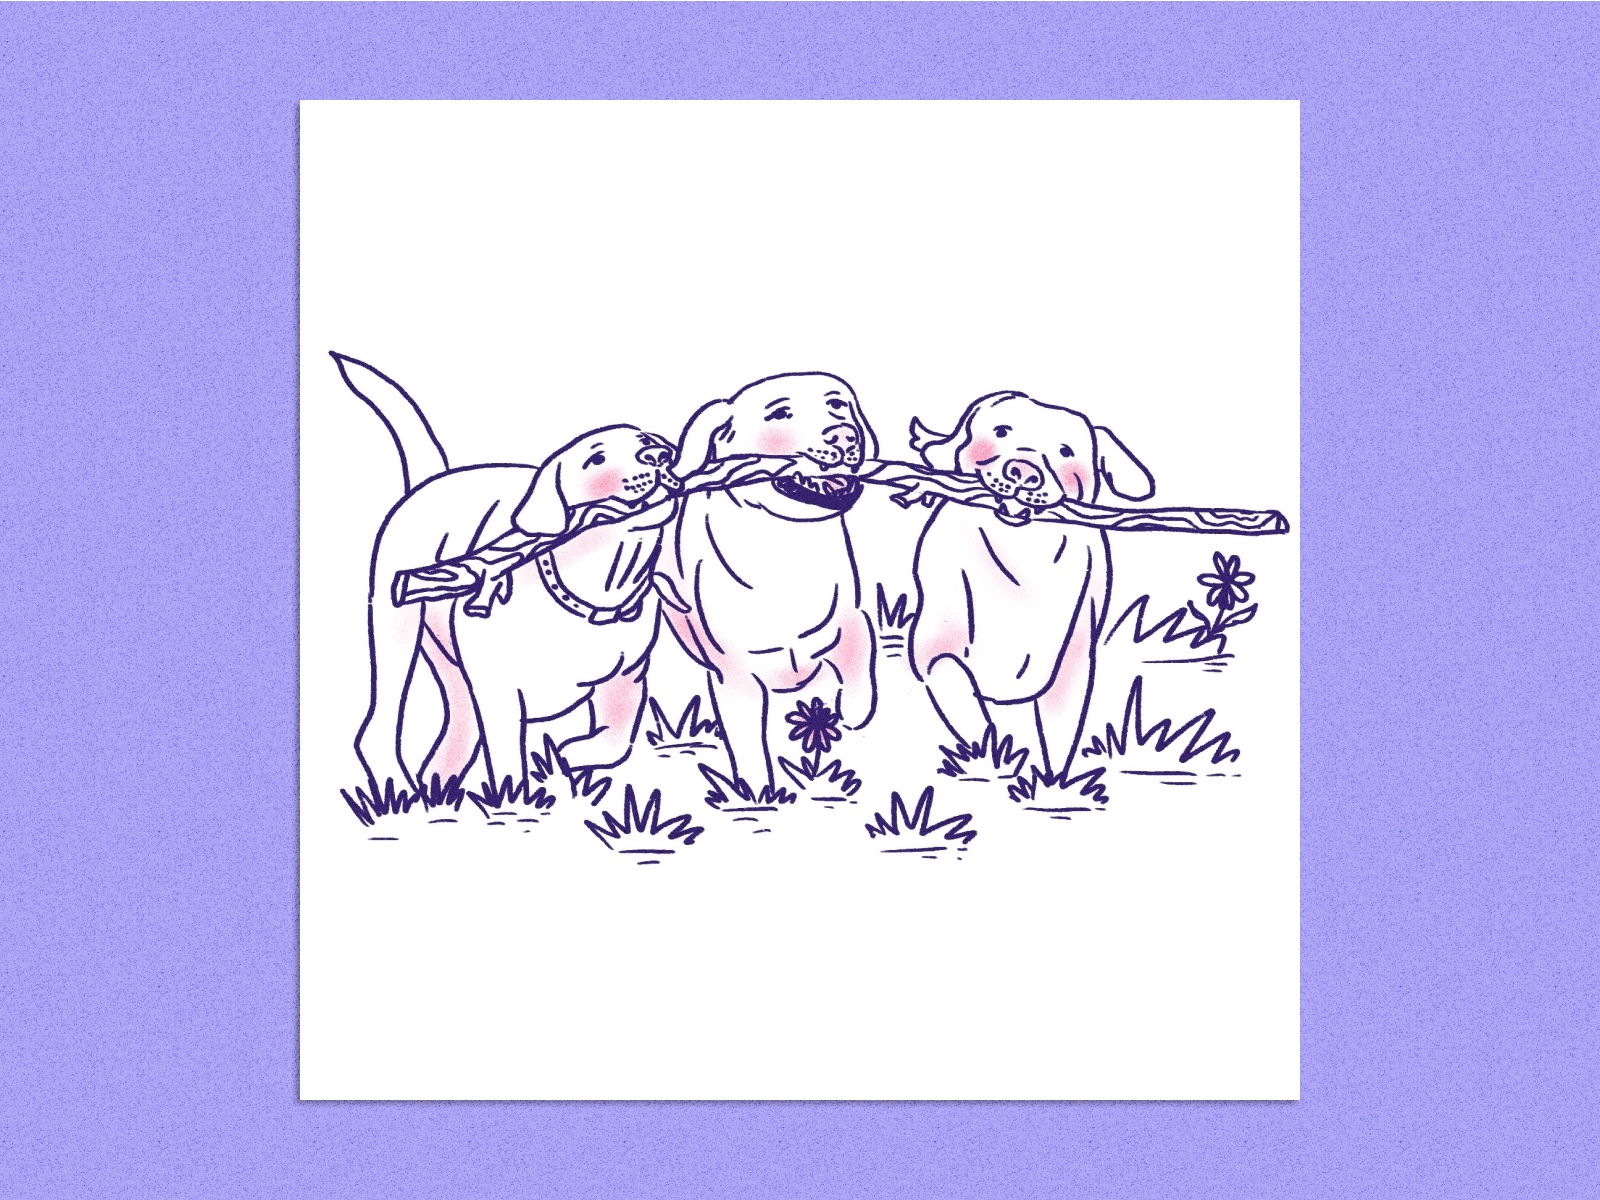 Three cute dogs run together holding one big stick.